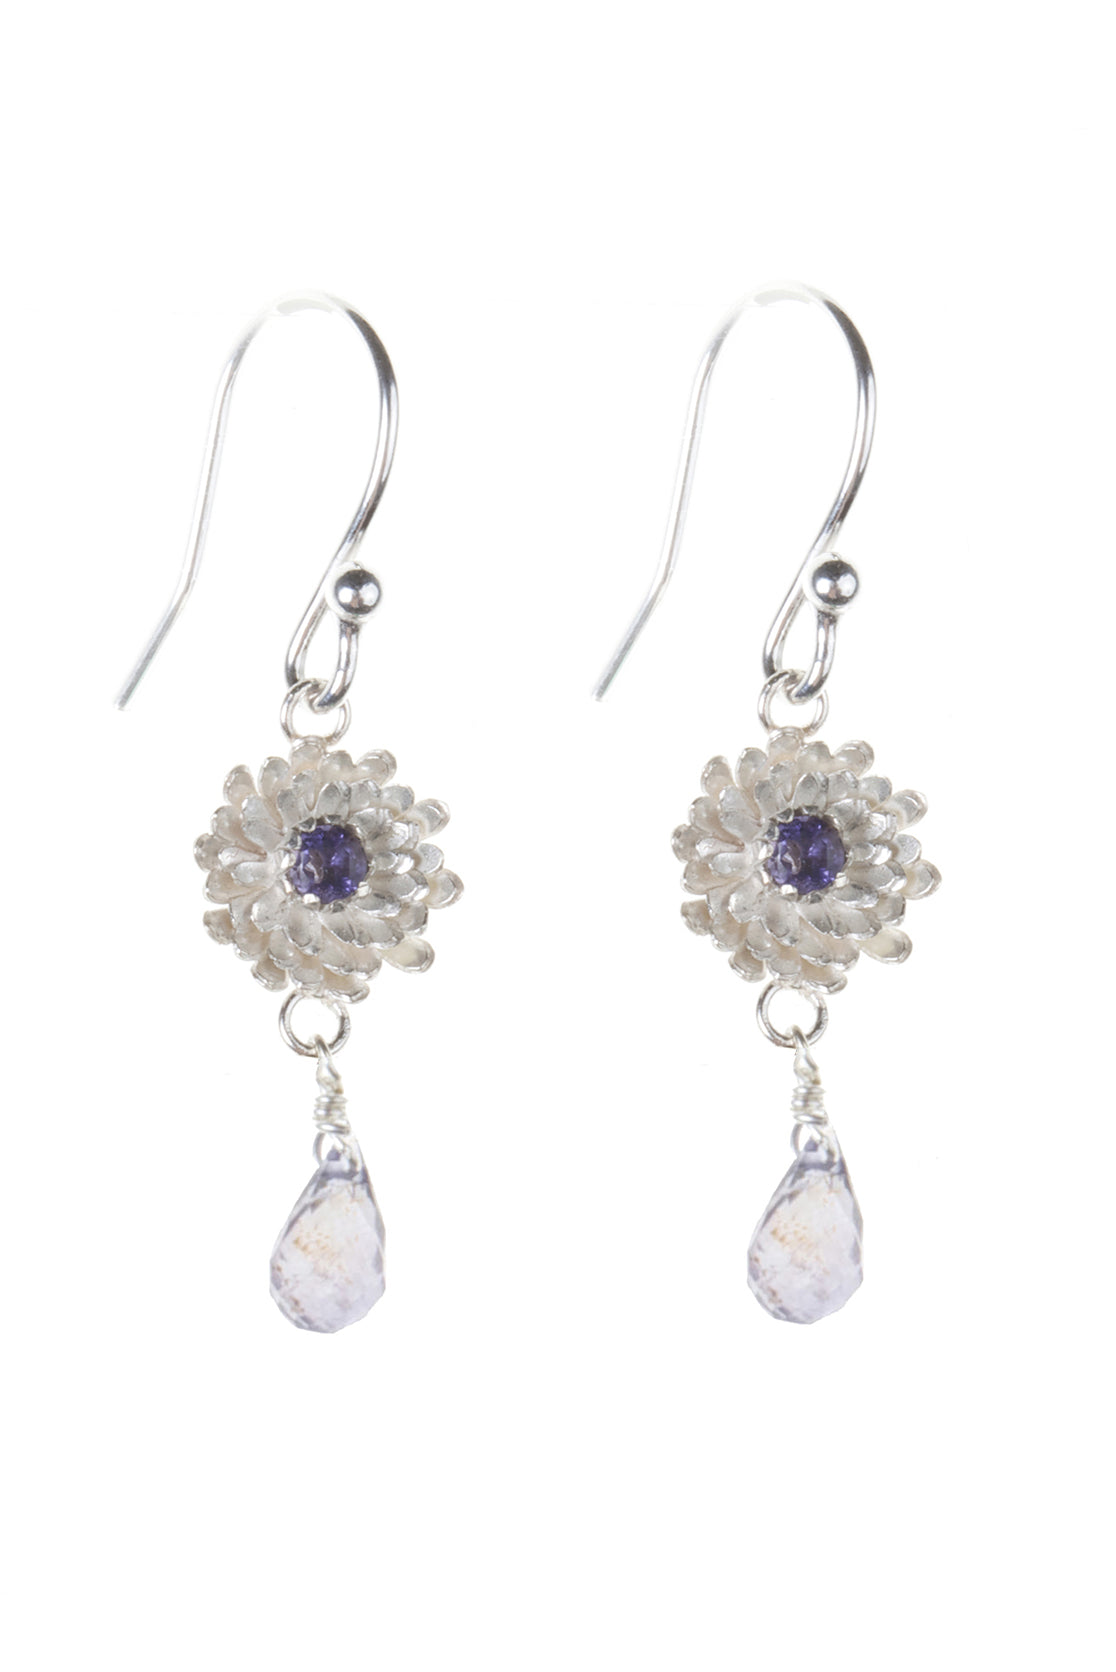 Gold dahlia drop earrings with sterling silver flower and white stone